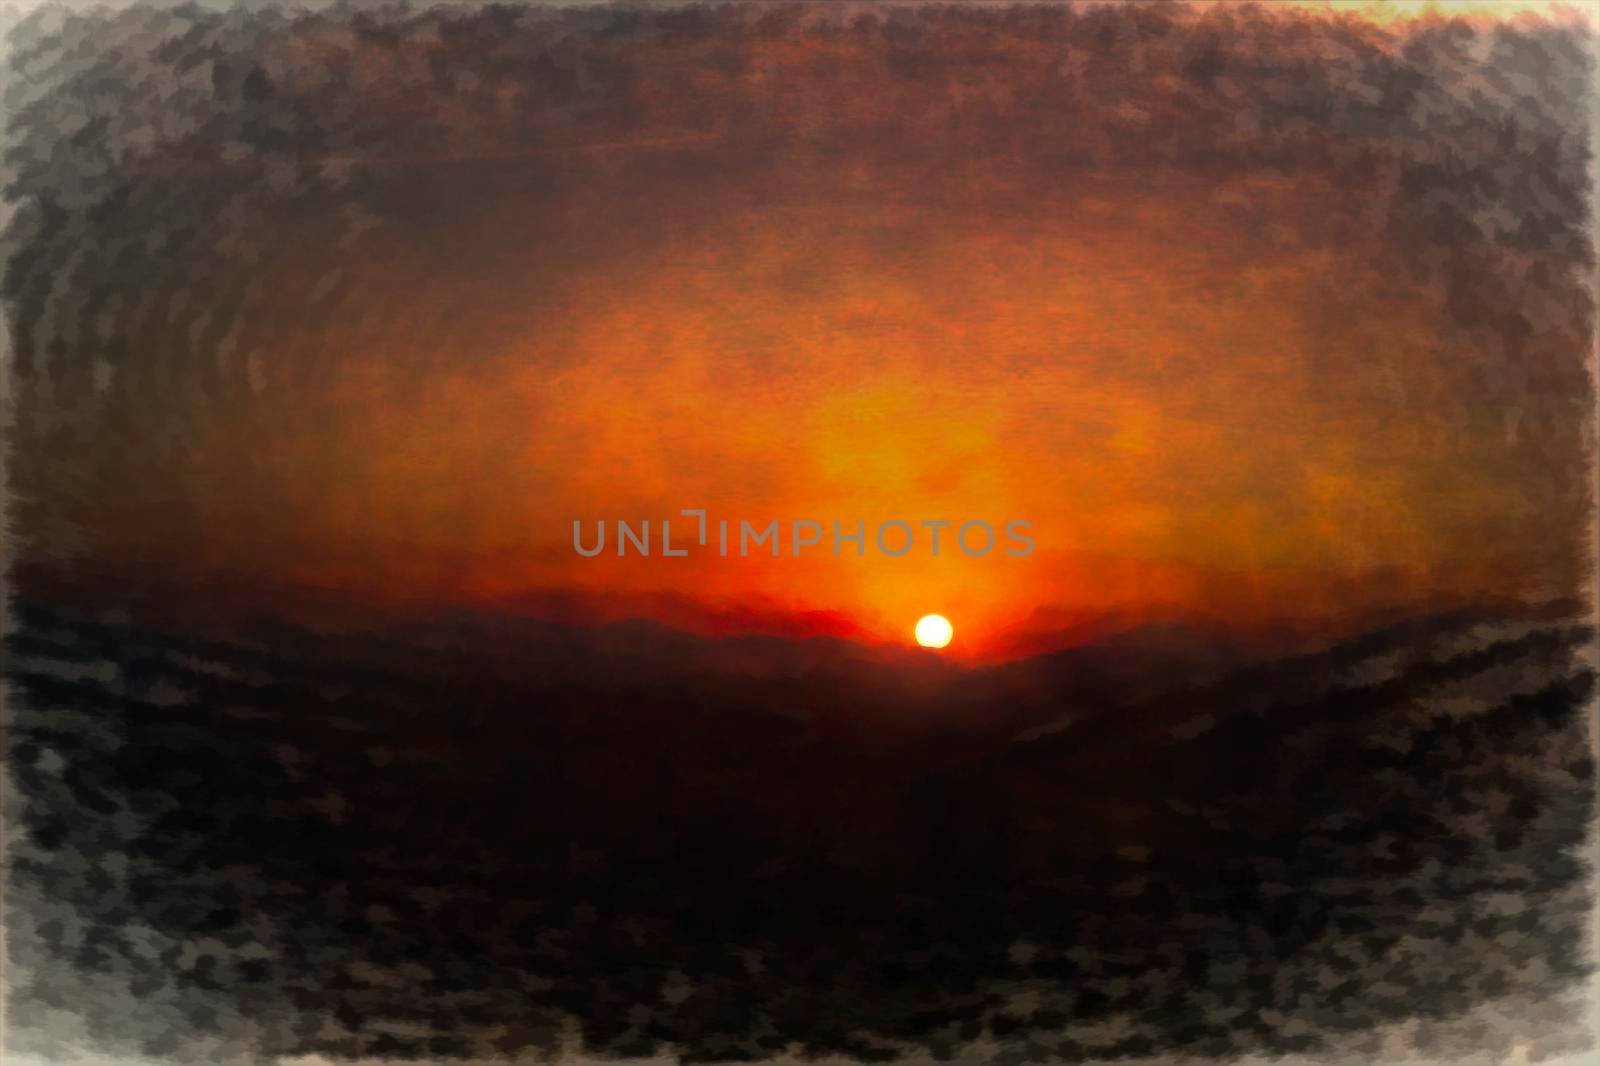 Digital painting of a sunset in mountains by ankarb